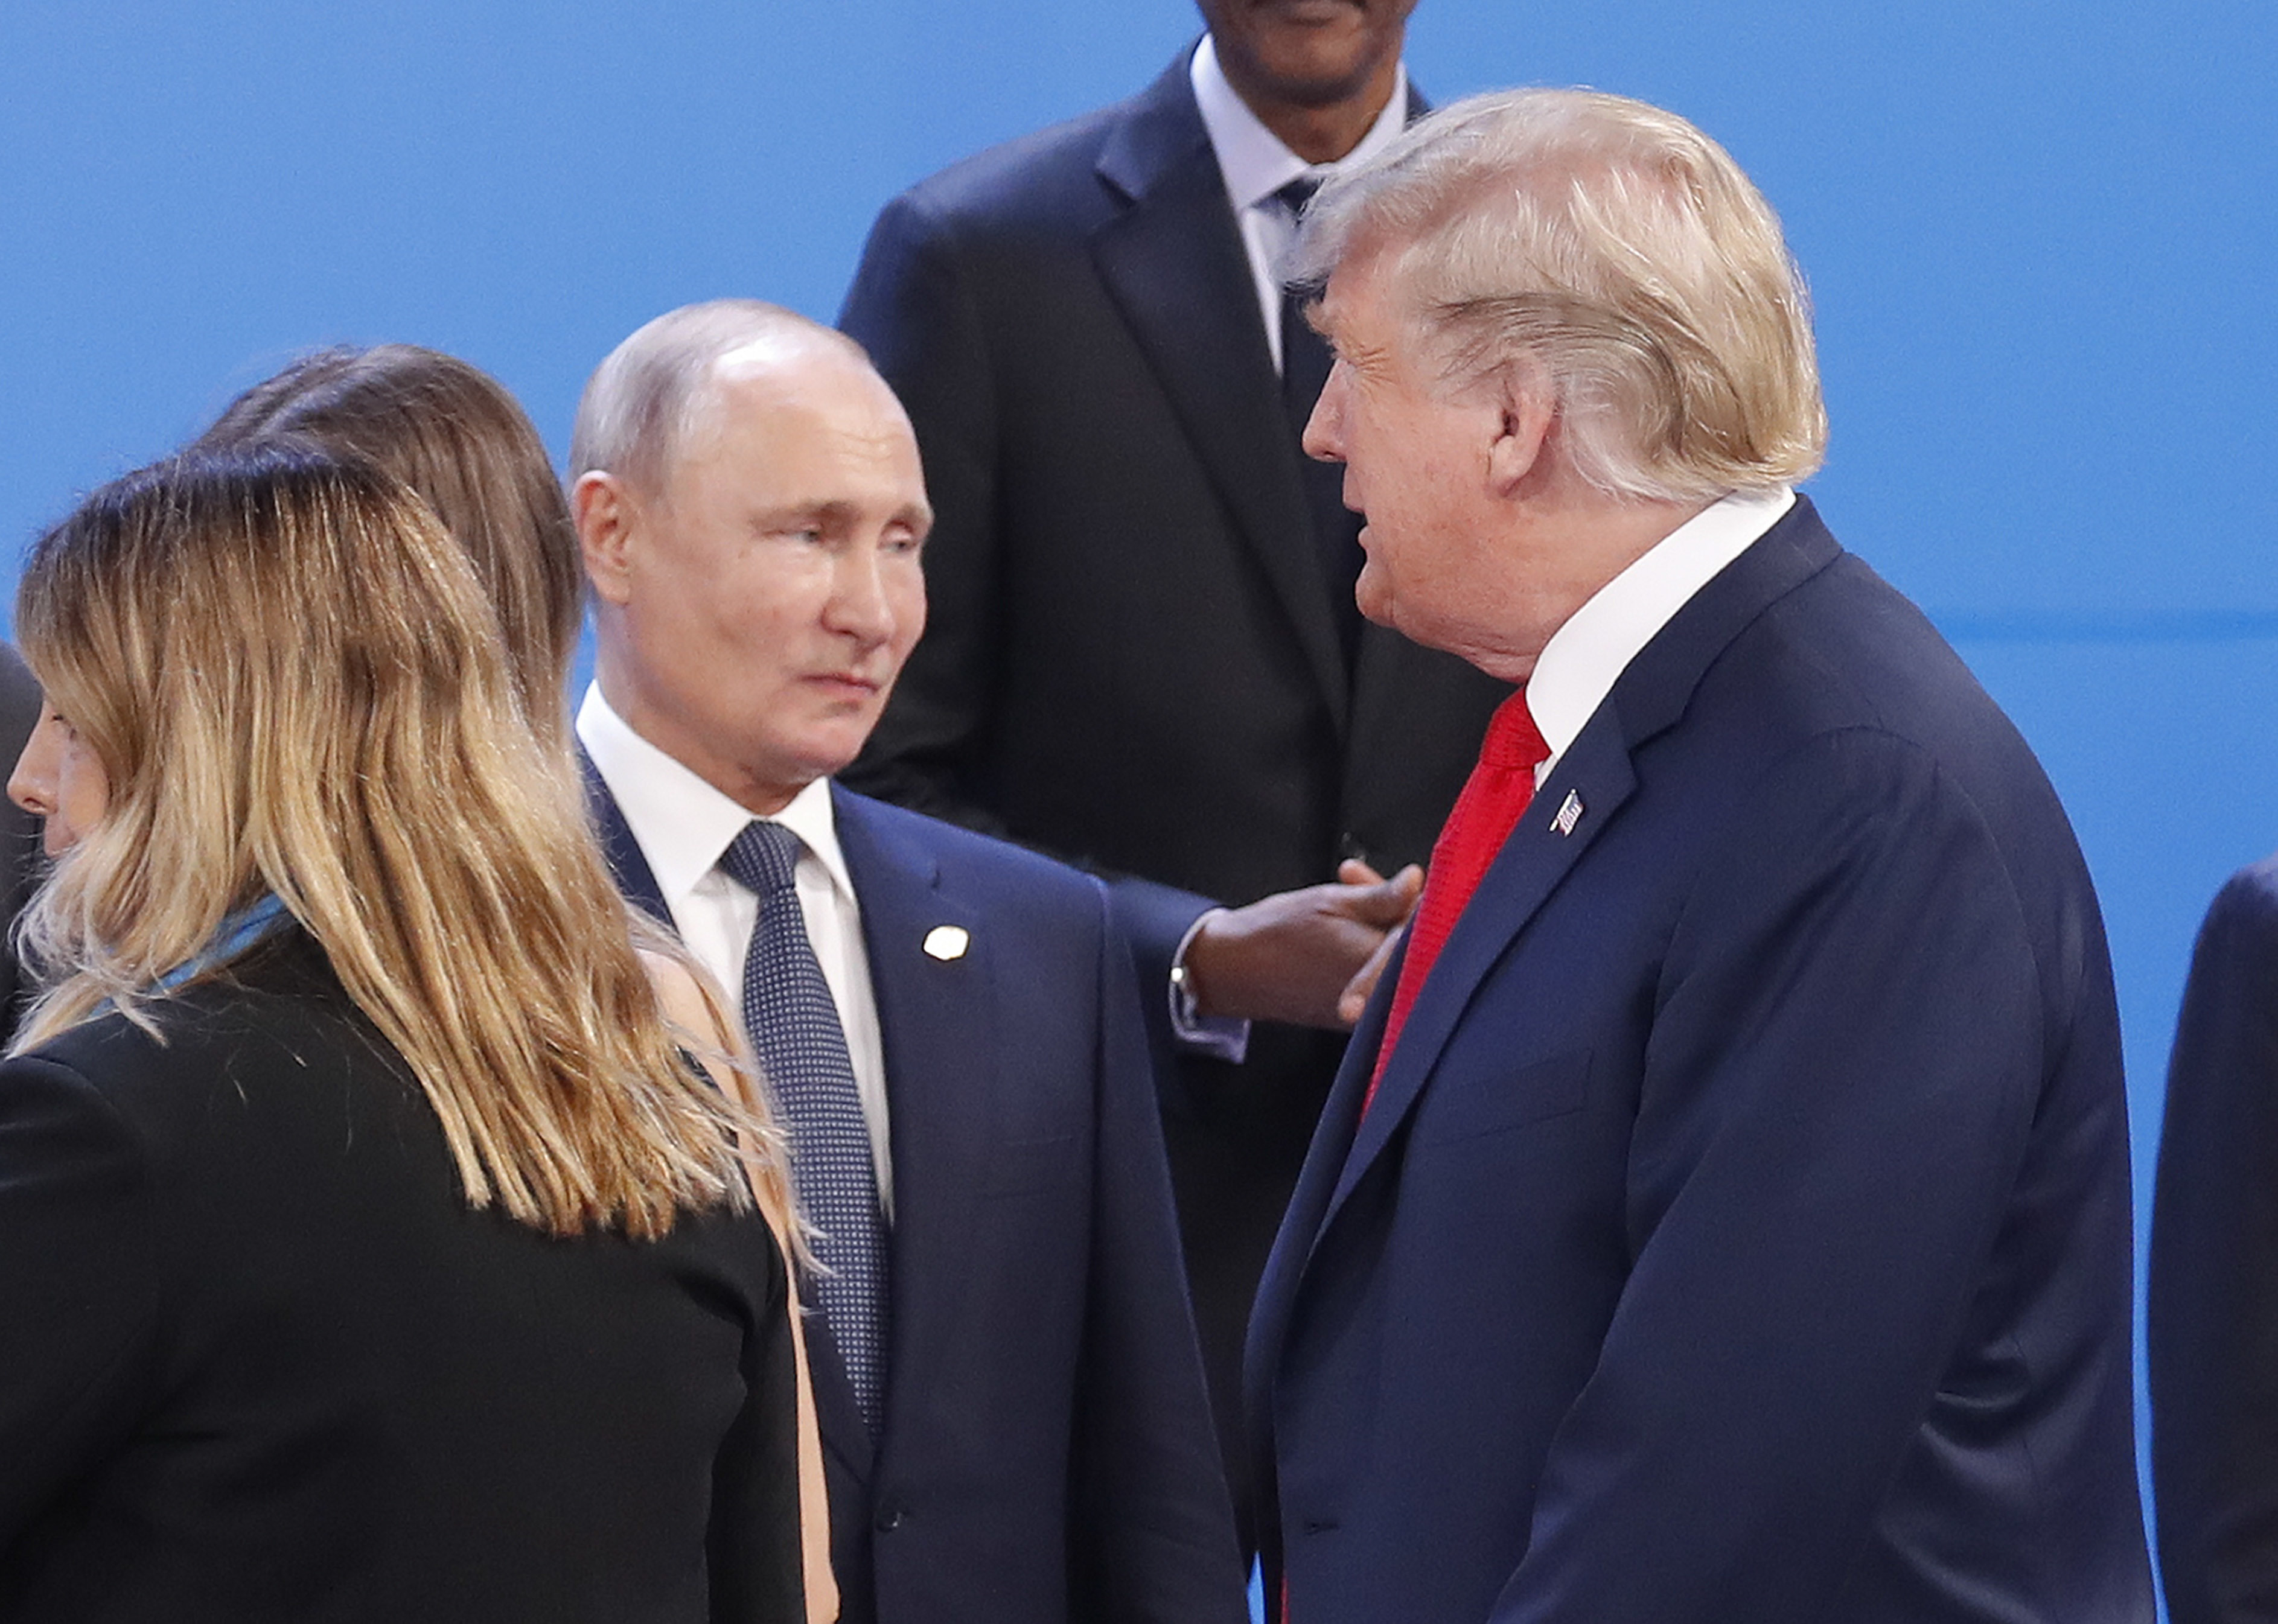 Donald Trump walks past Vladimir Putin as they gather for the group photo at the start of the G20 summit in Buenos Aires